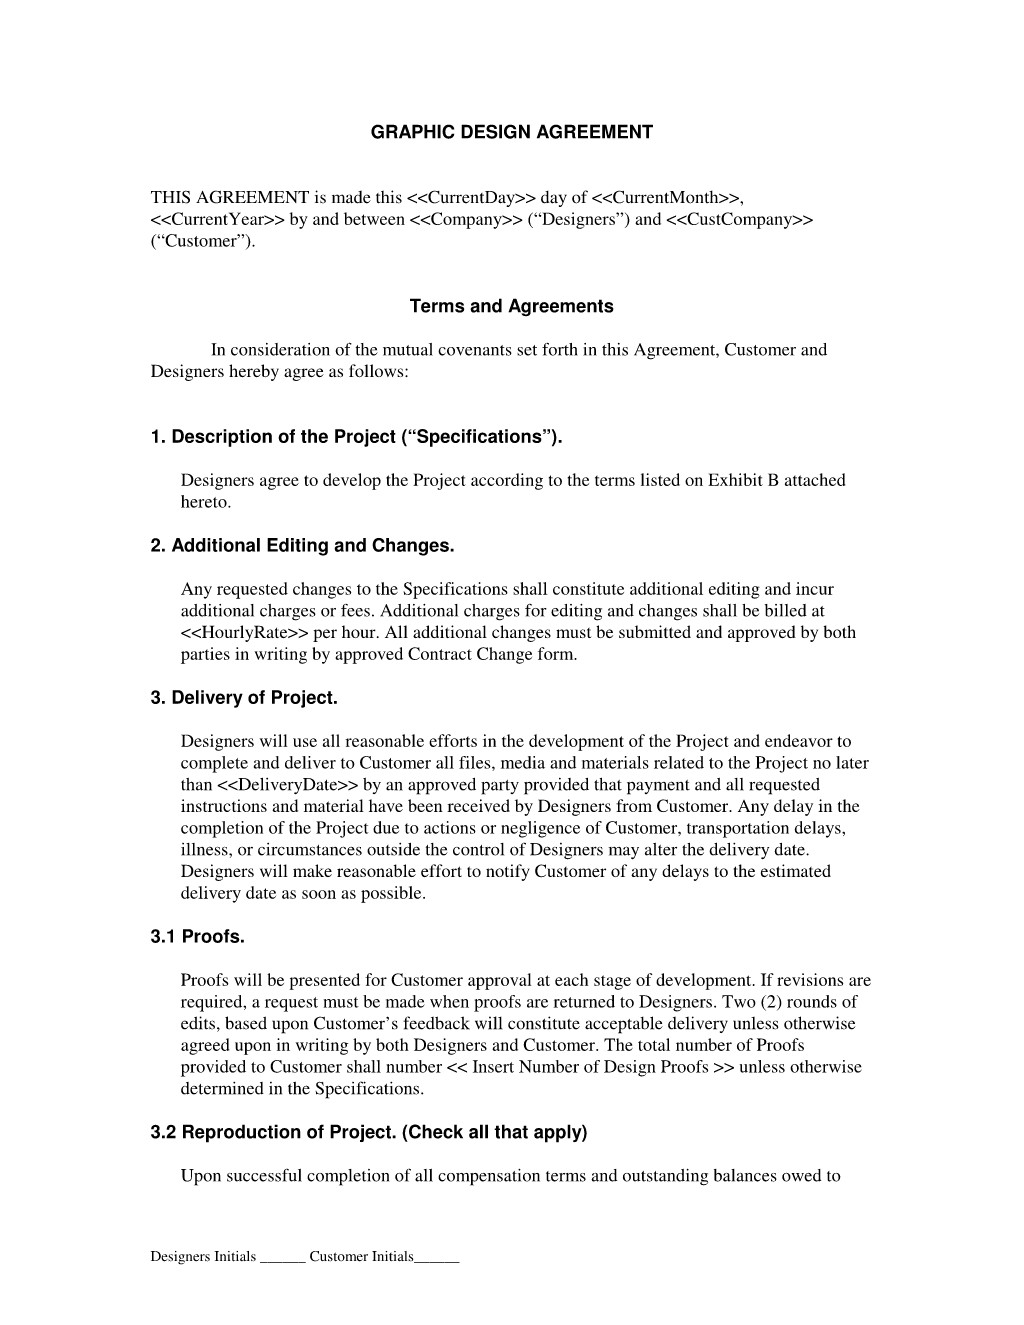 Design Contract Template Com Document Graphic